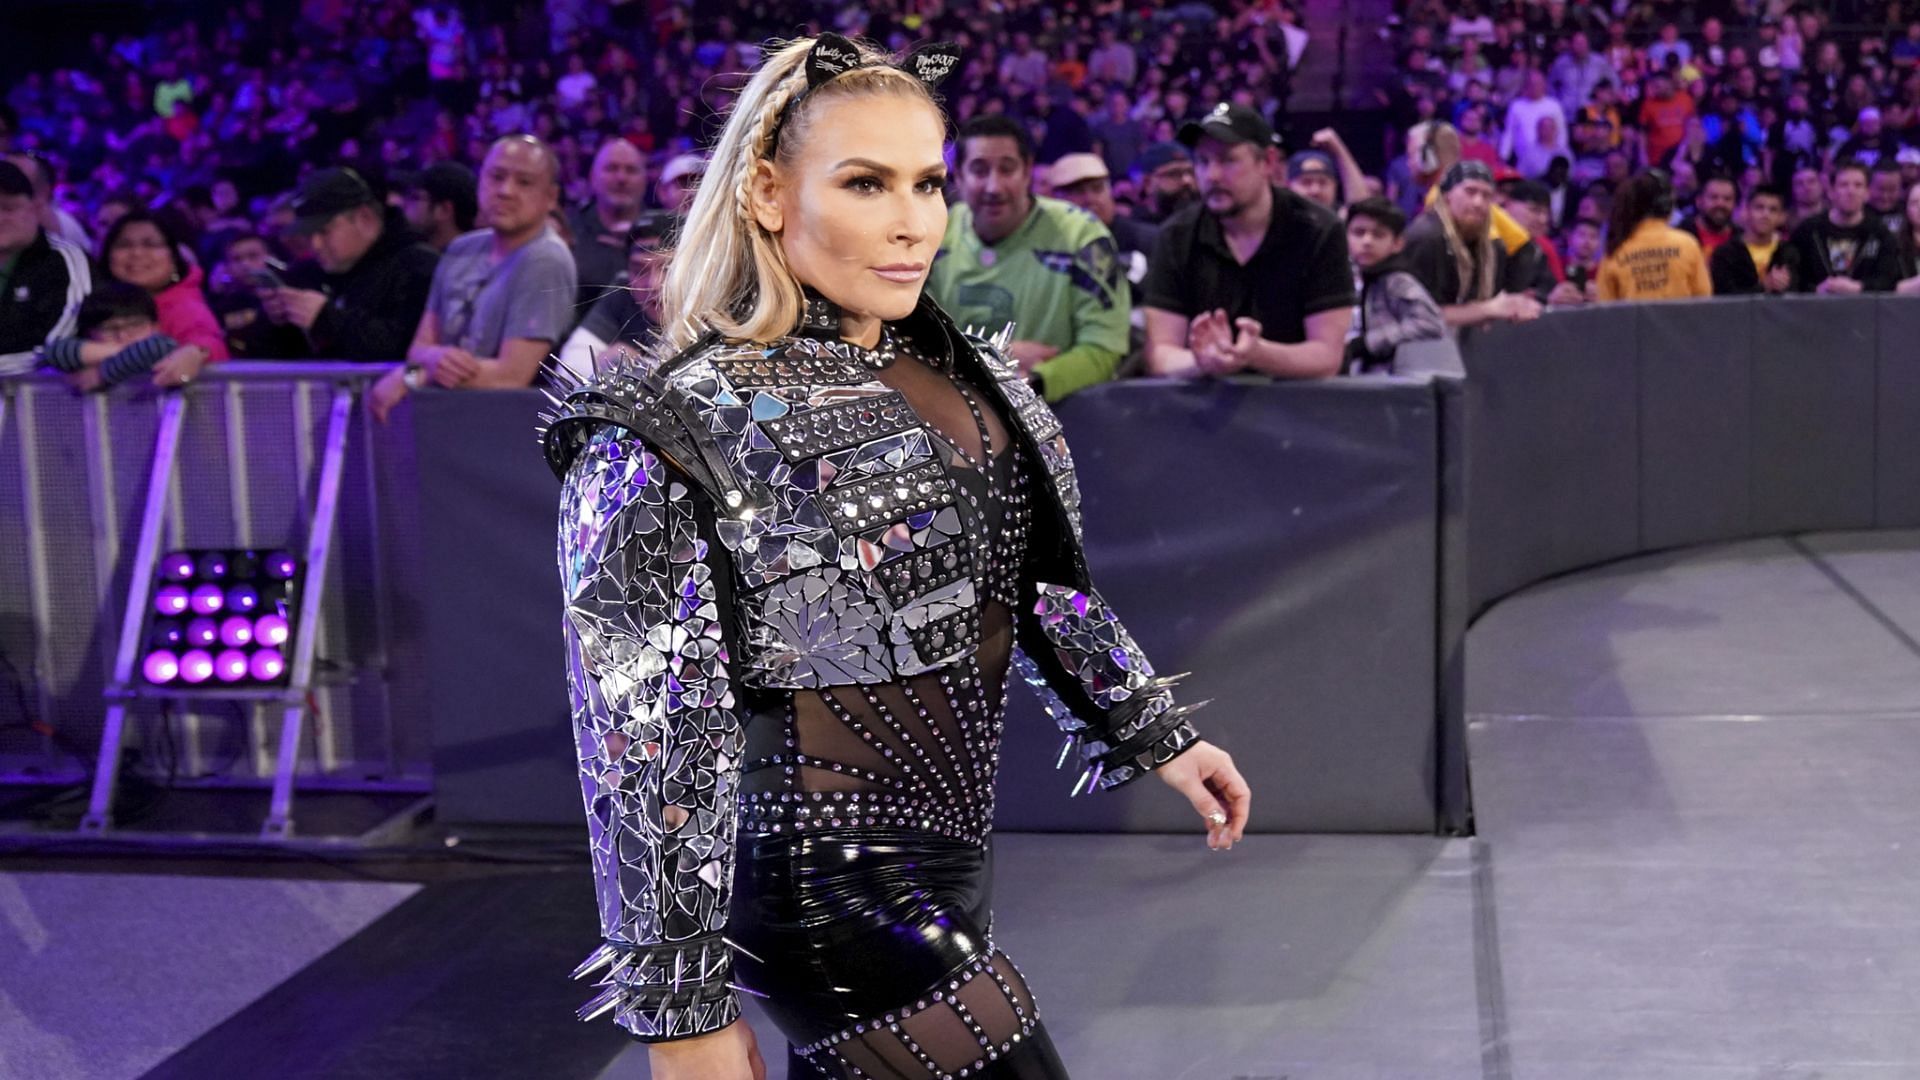 Natalya is a former multi-time women